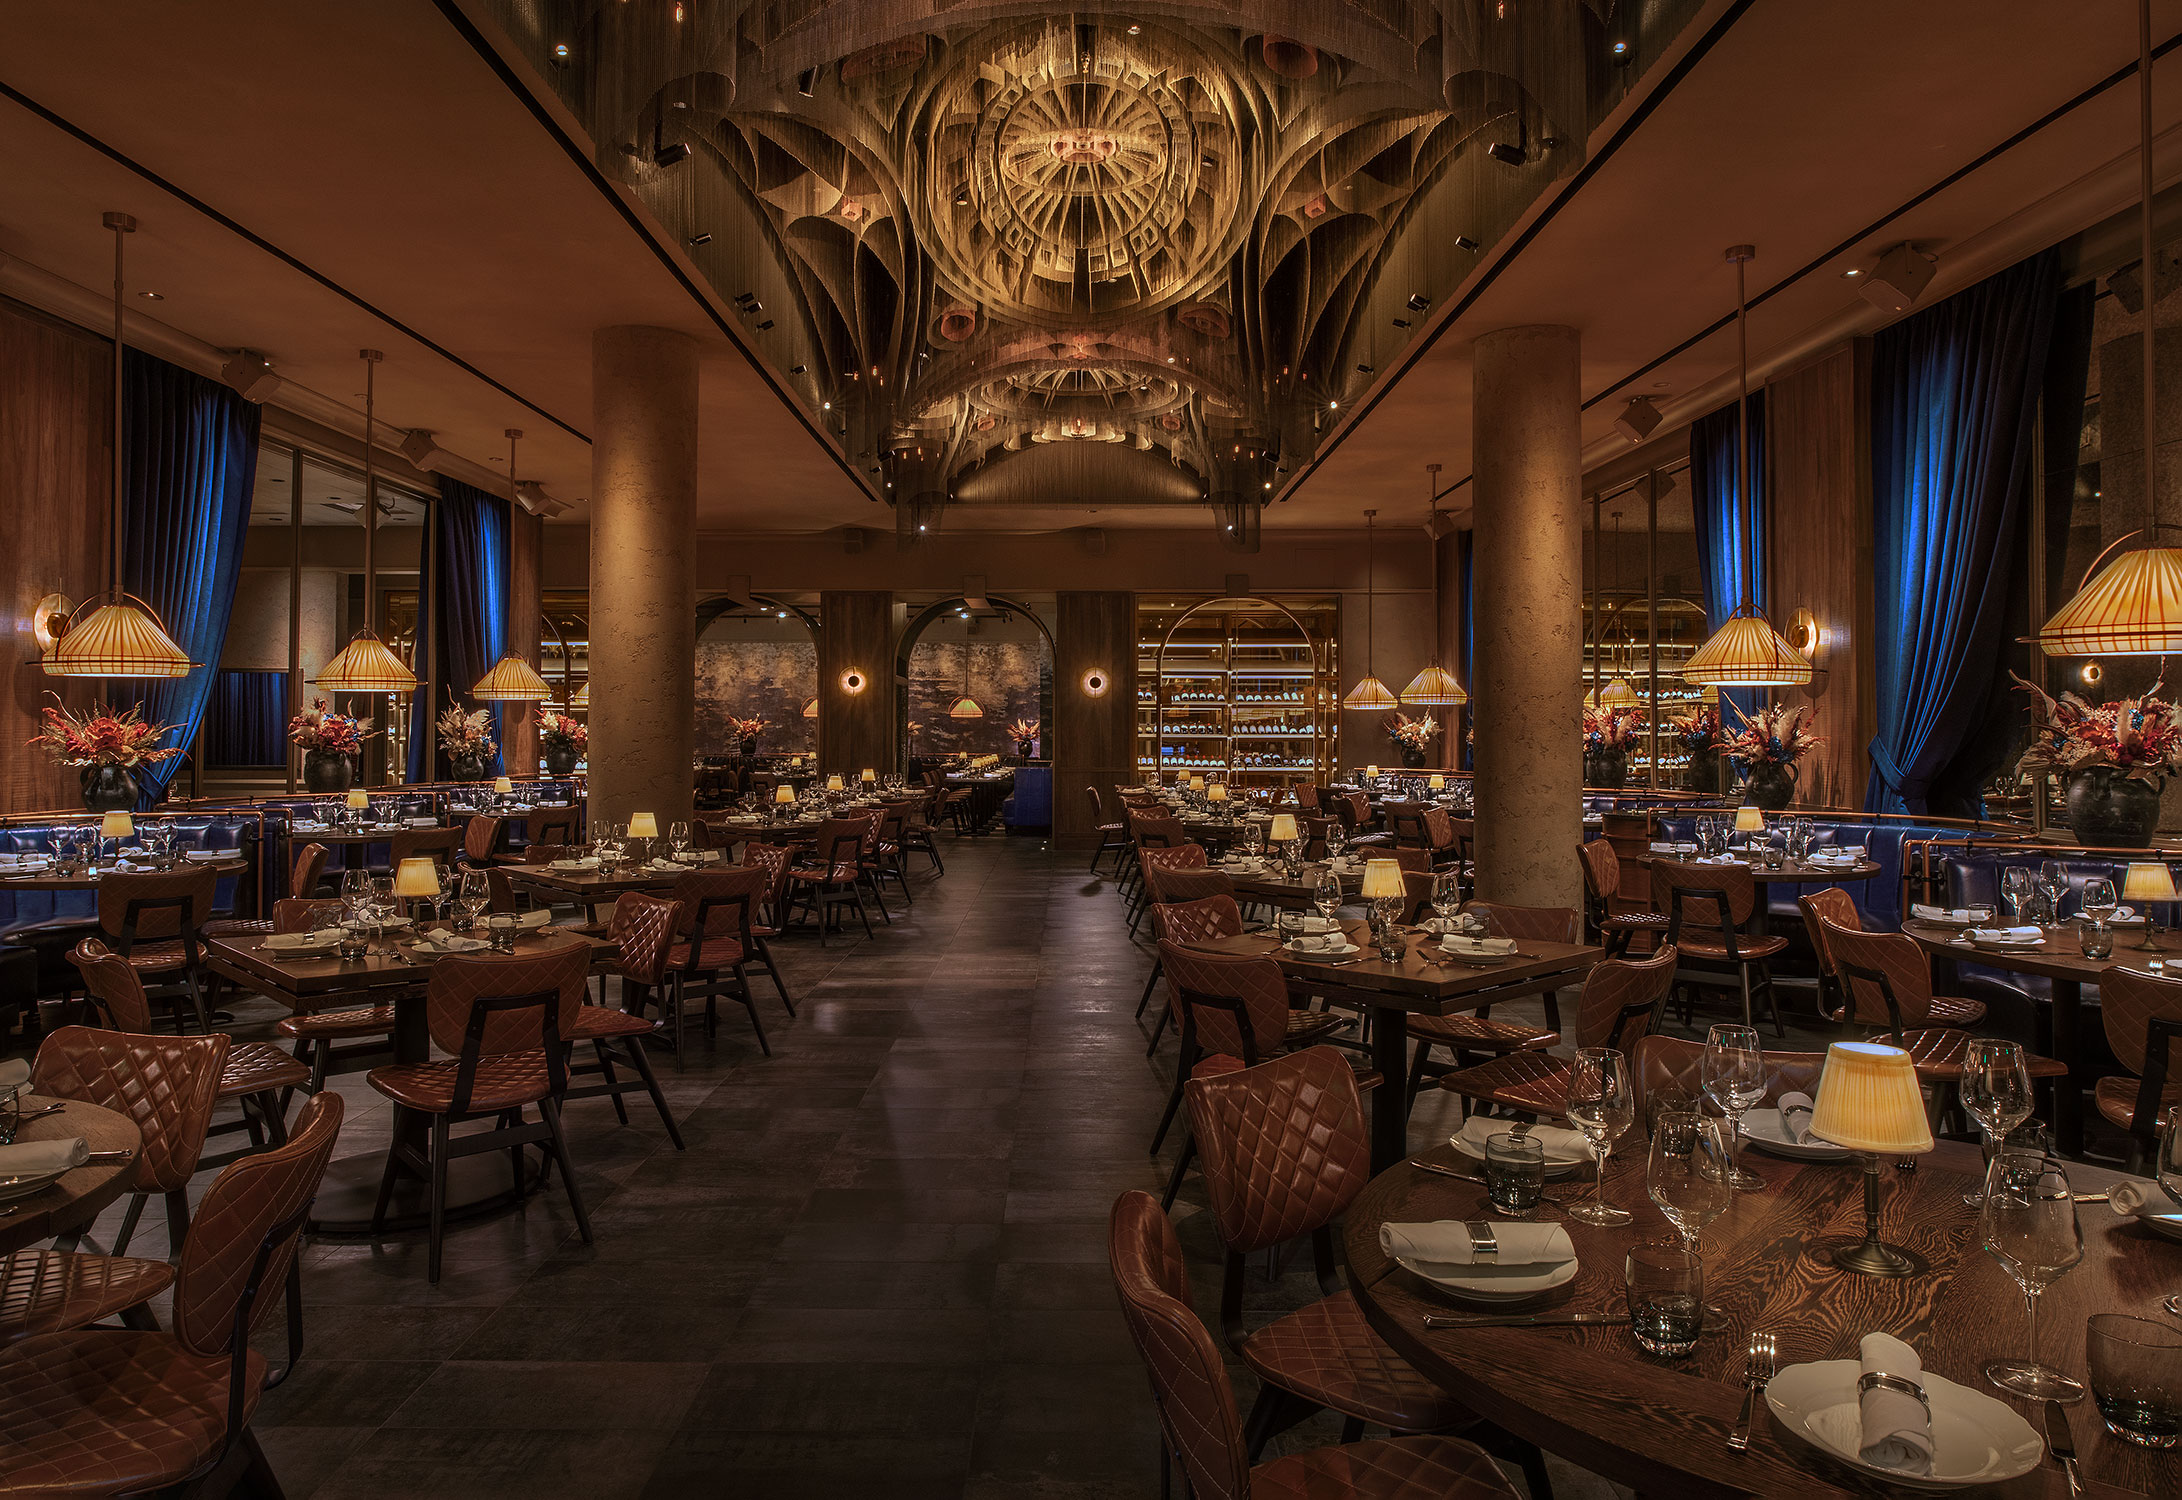 Willowlamp’s Theatrical Ceiling Installation Shines at Cathédrale Restaurant in Las Vegas